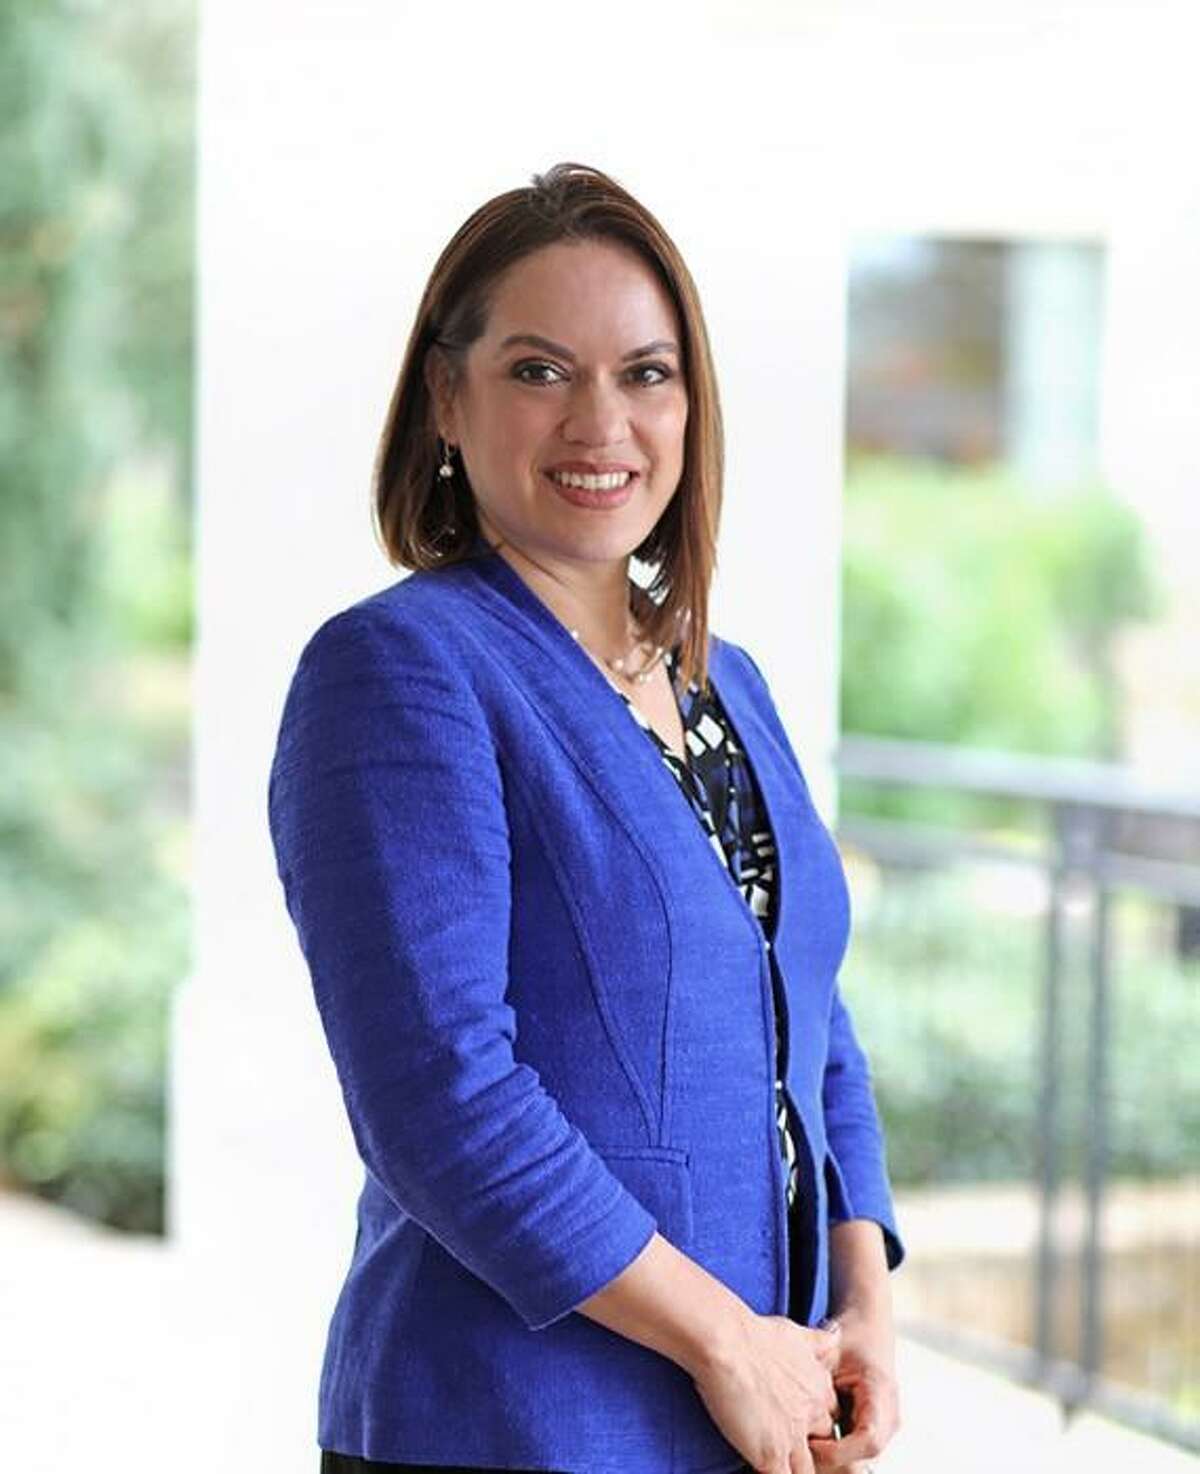 Berenice Villarreal is board chair of a San Antonio-based national humanitarian nonprofit called Endeavors, which shelters migrant boys and girls seeking asylum.